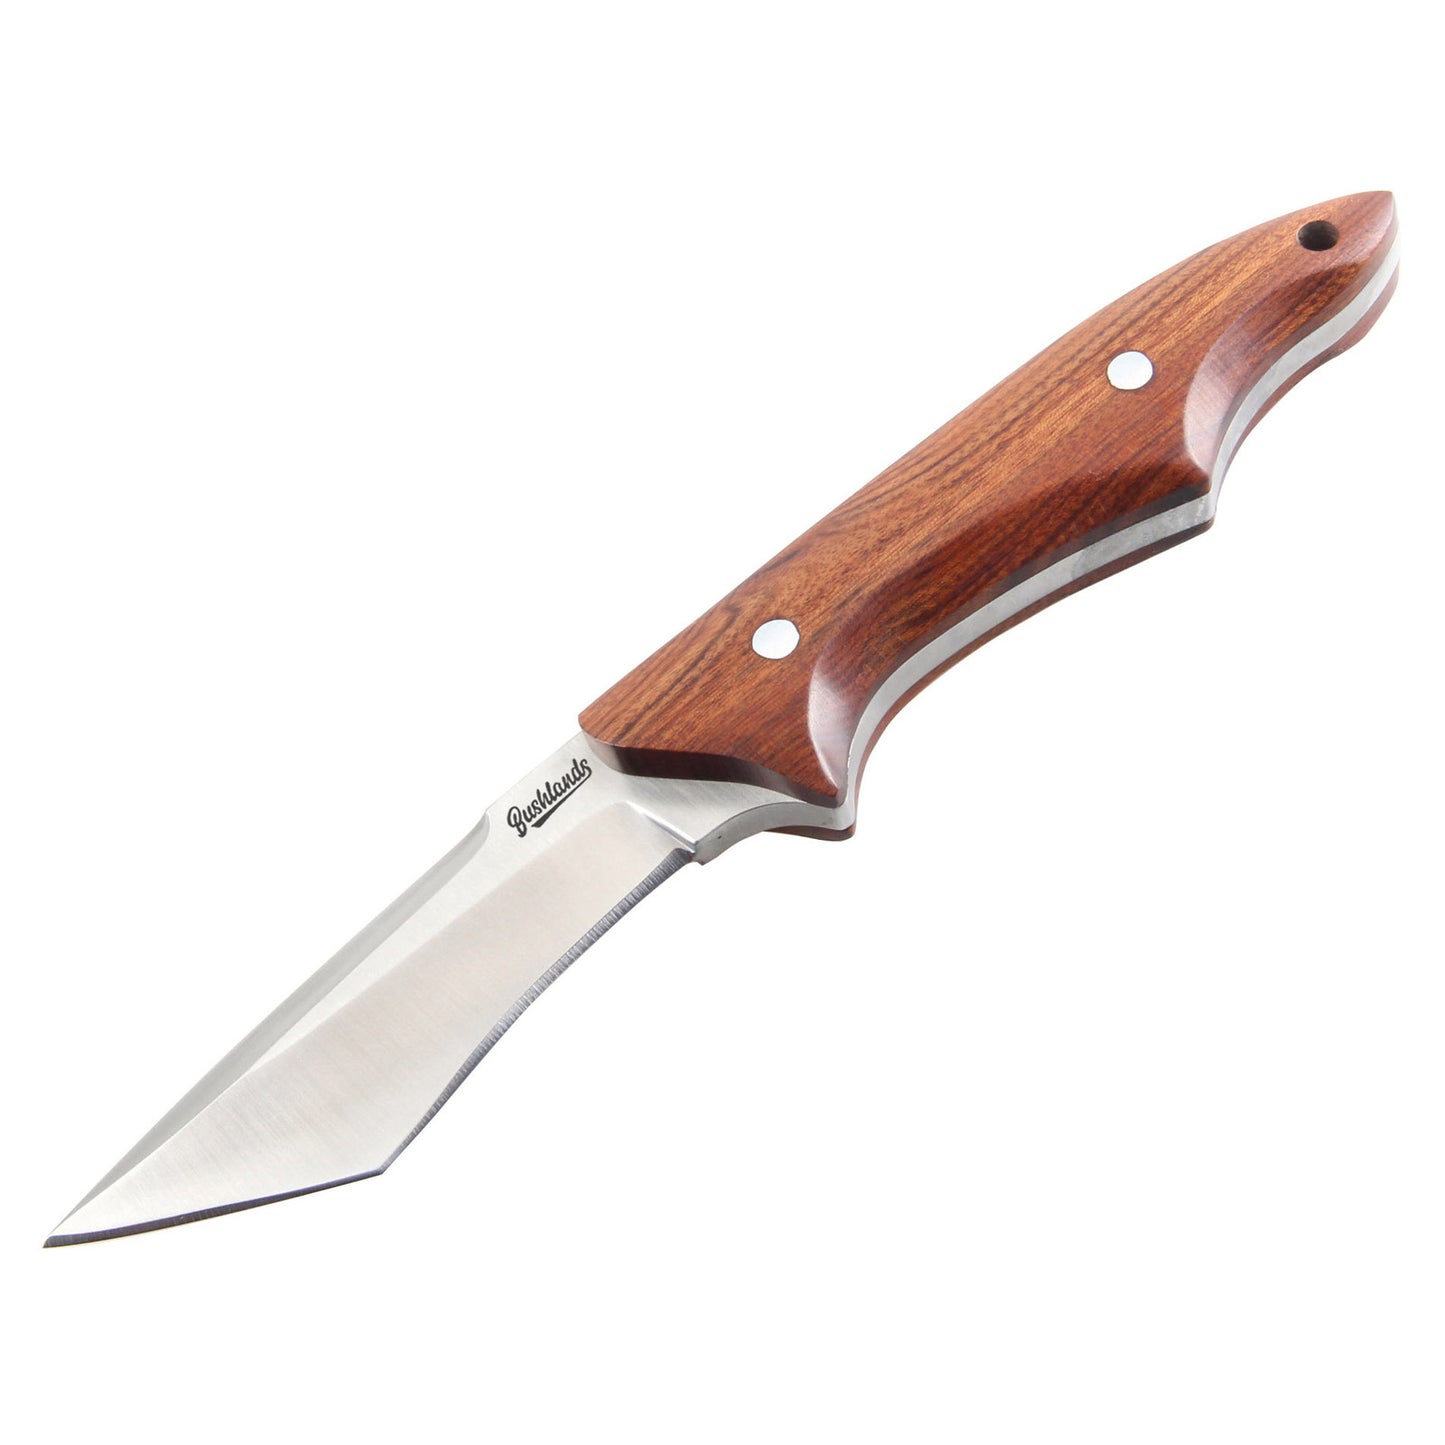 Bushlands Bushlands Hunting Tanto Knife 4 Inch Stainless Steel Blade - With Wenge Handle #1771 Sienna